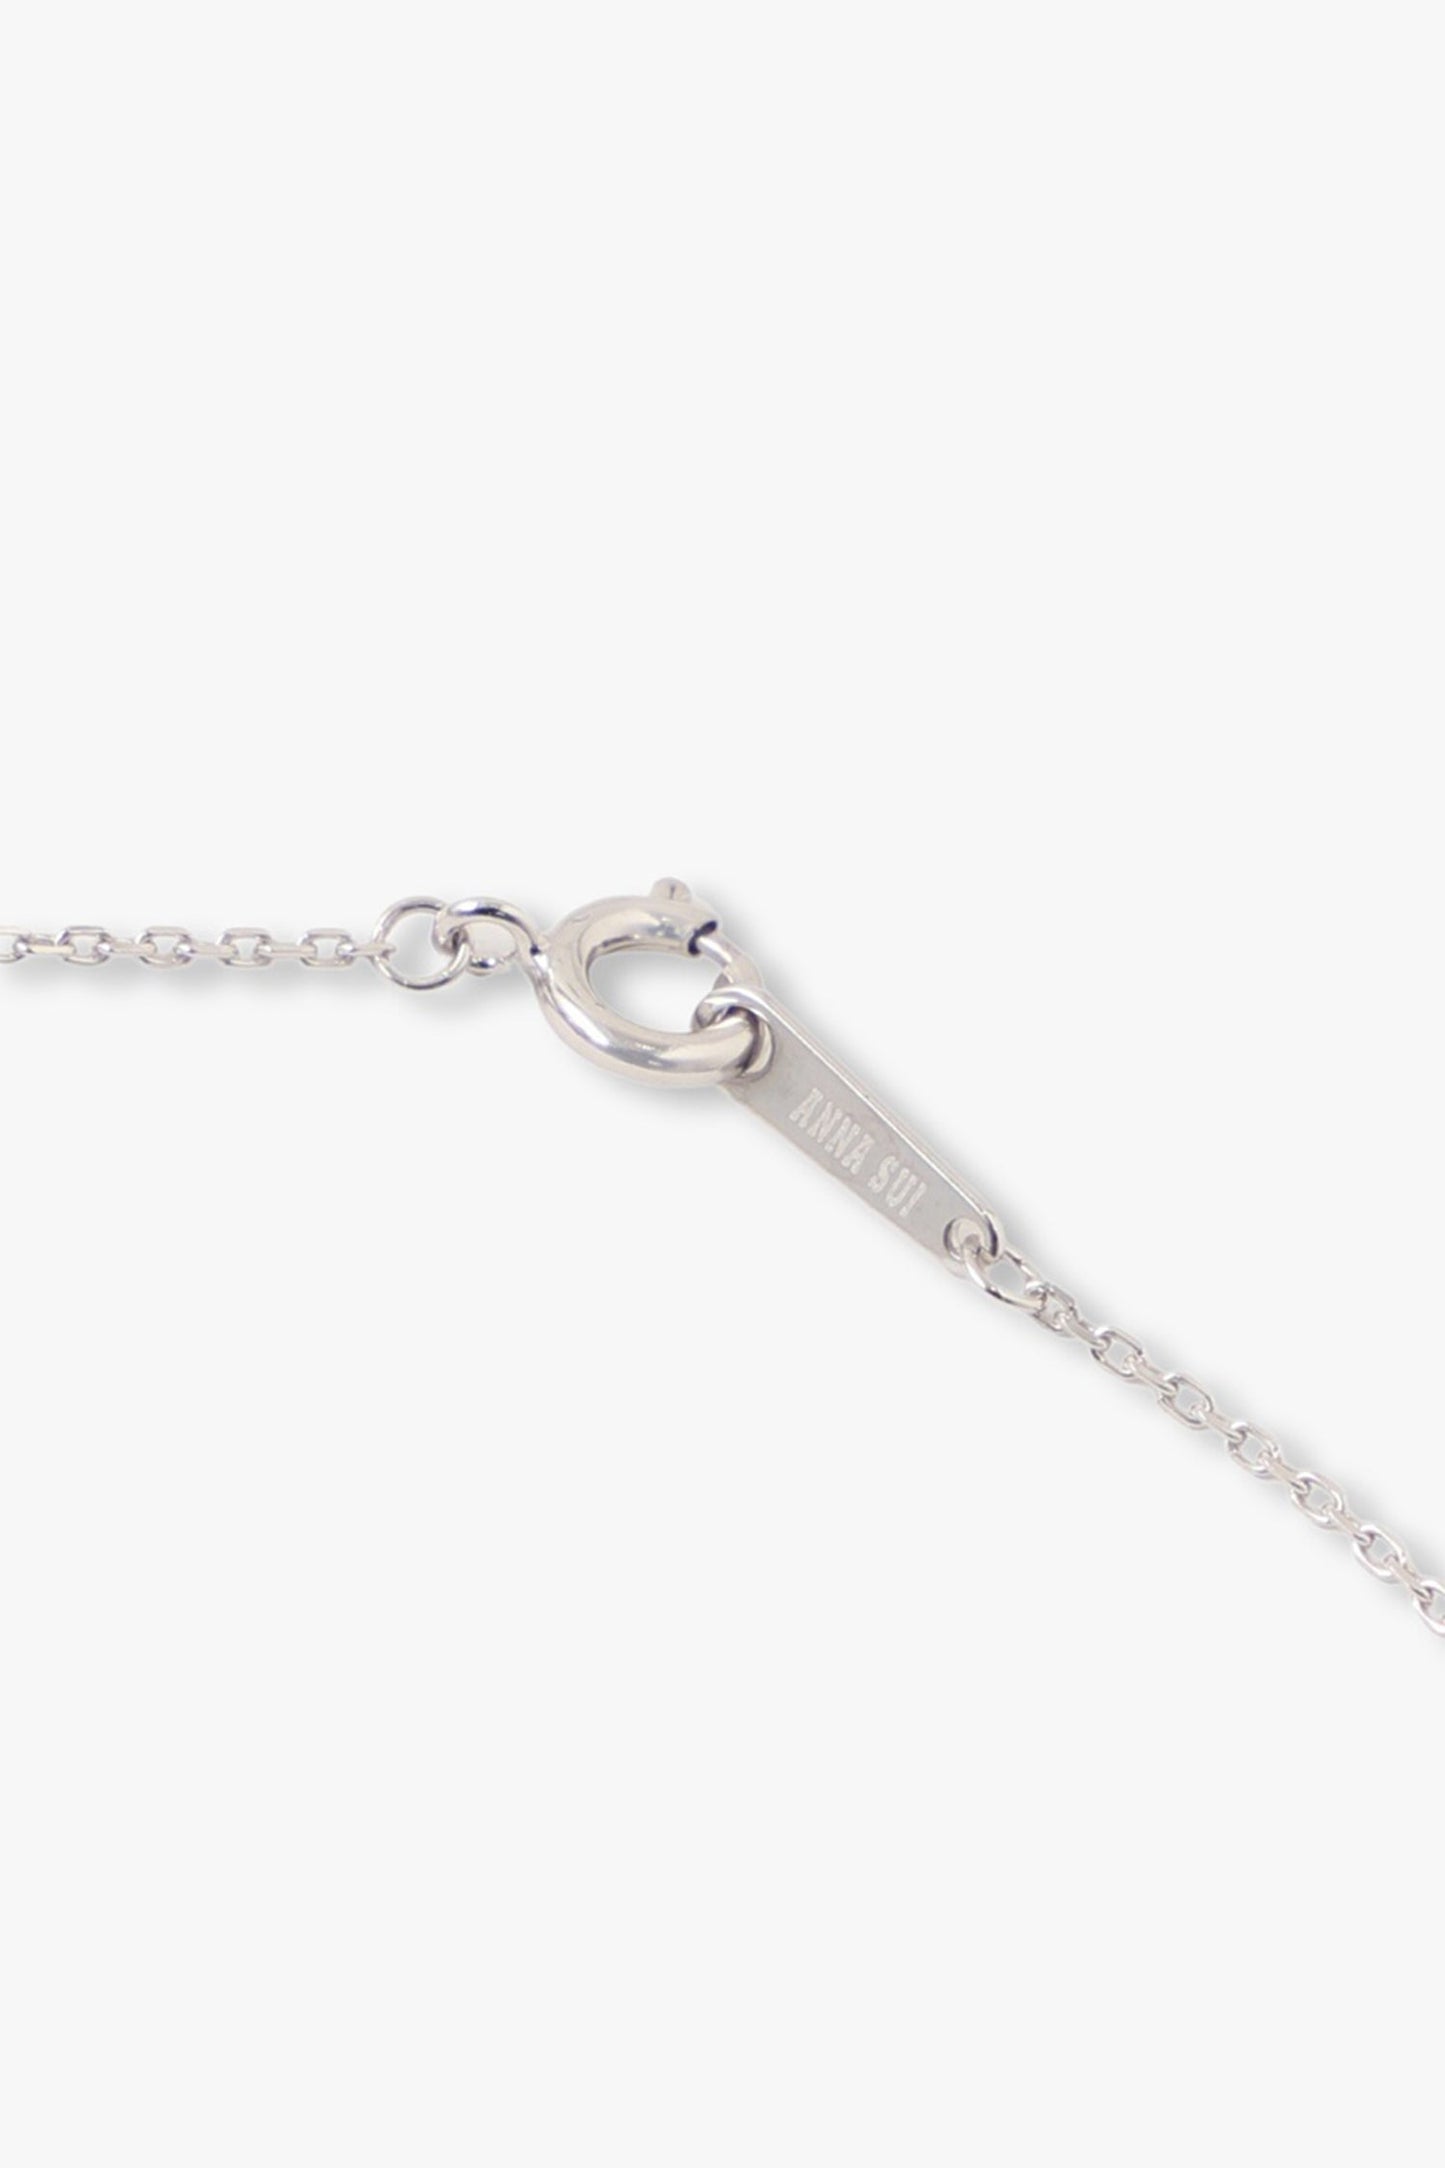  Necklace Silver, Detail of the spring ring clasp with Anna Sui imprint logo at the end